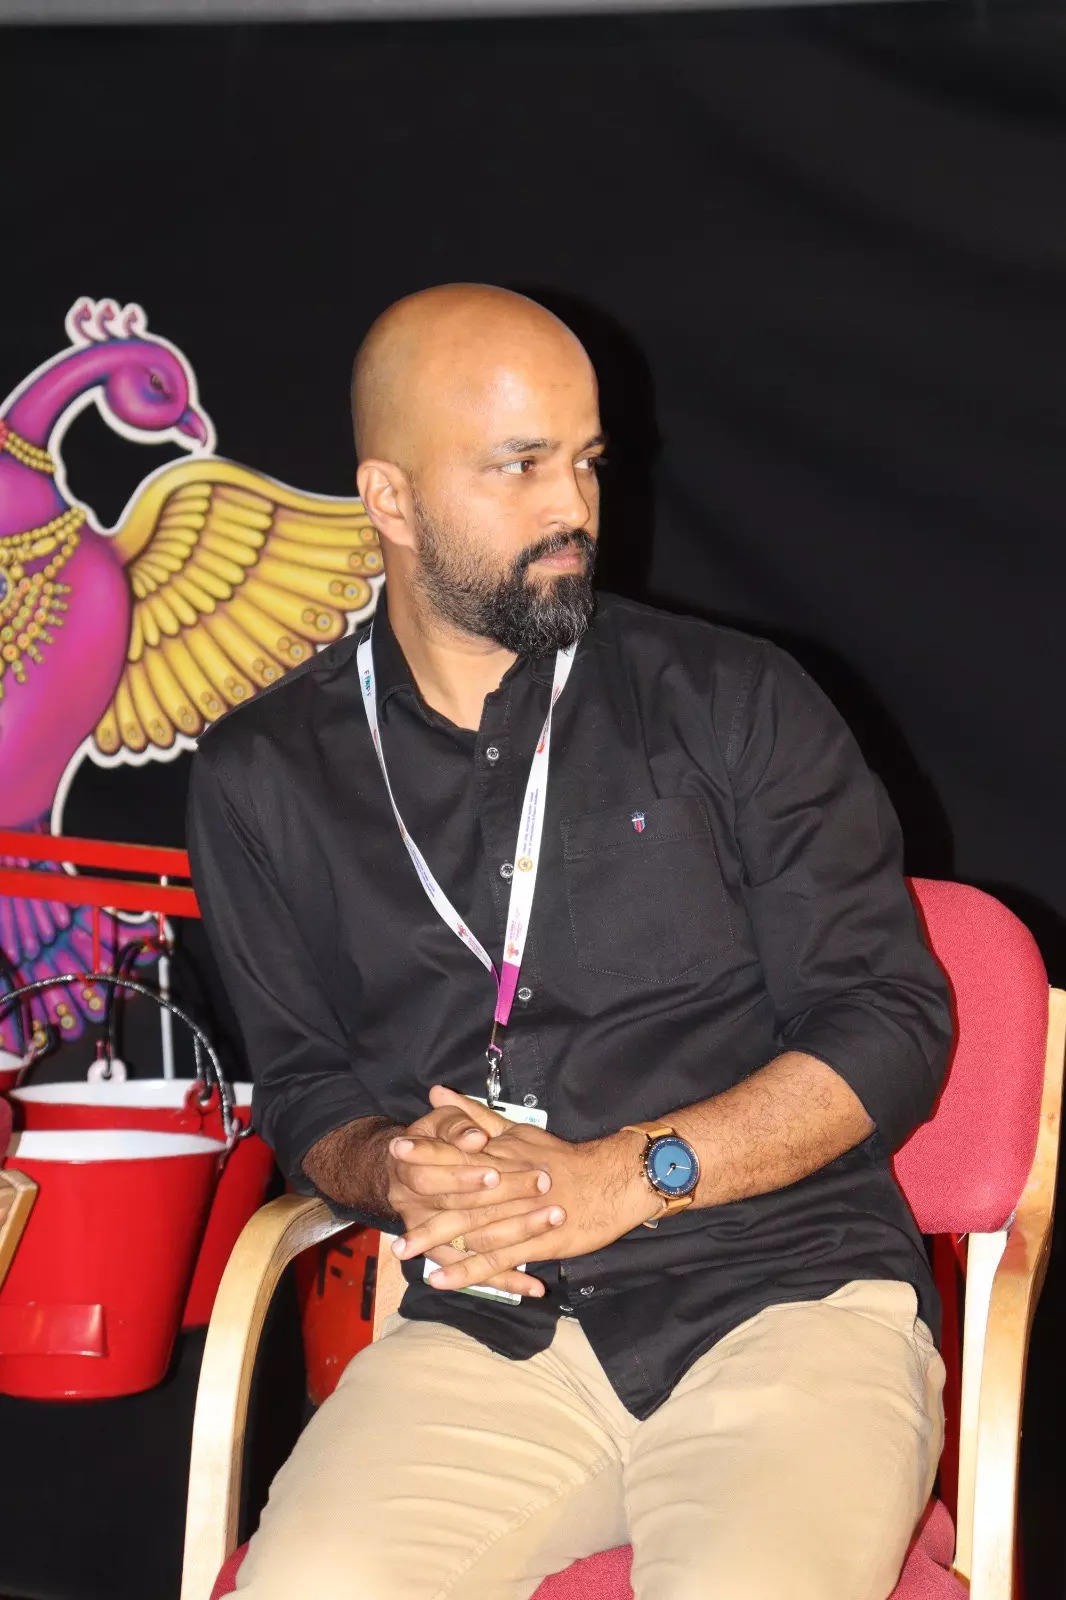 I don't believe films can bring about social change: Director Sumanth Bhat